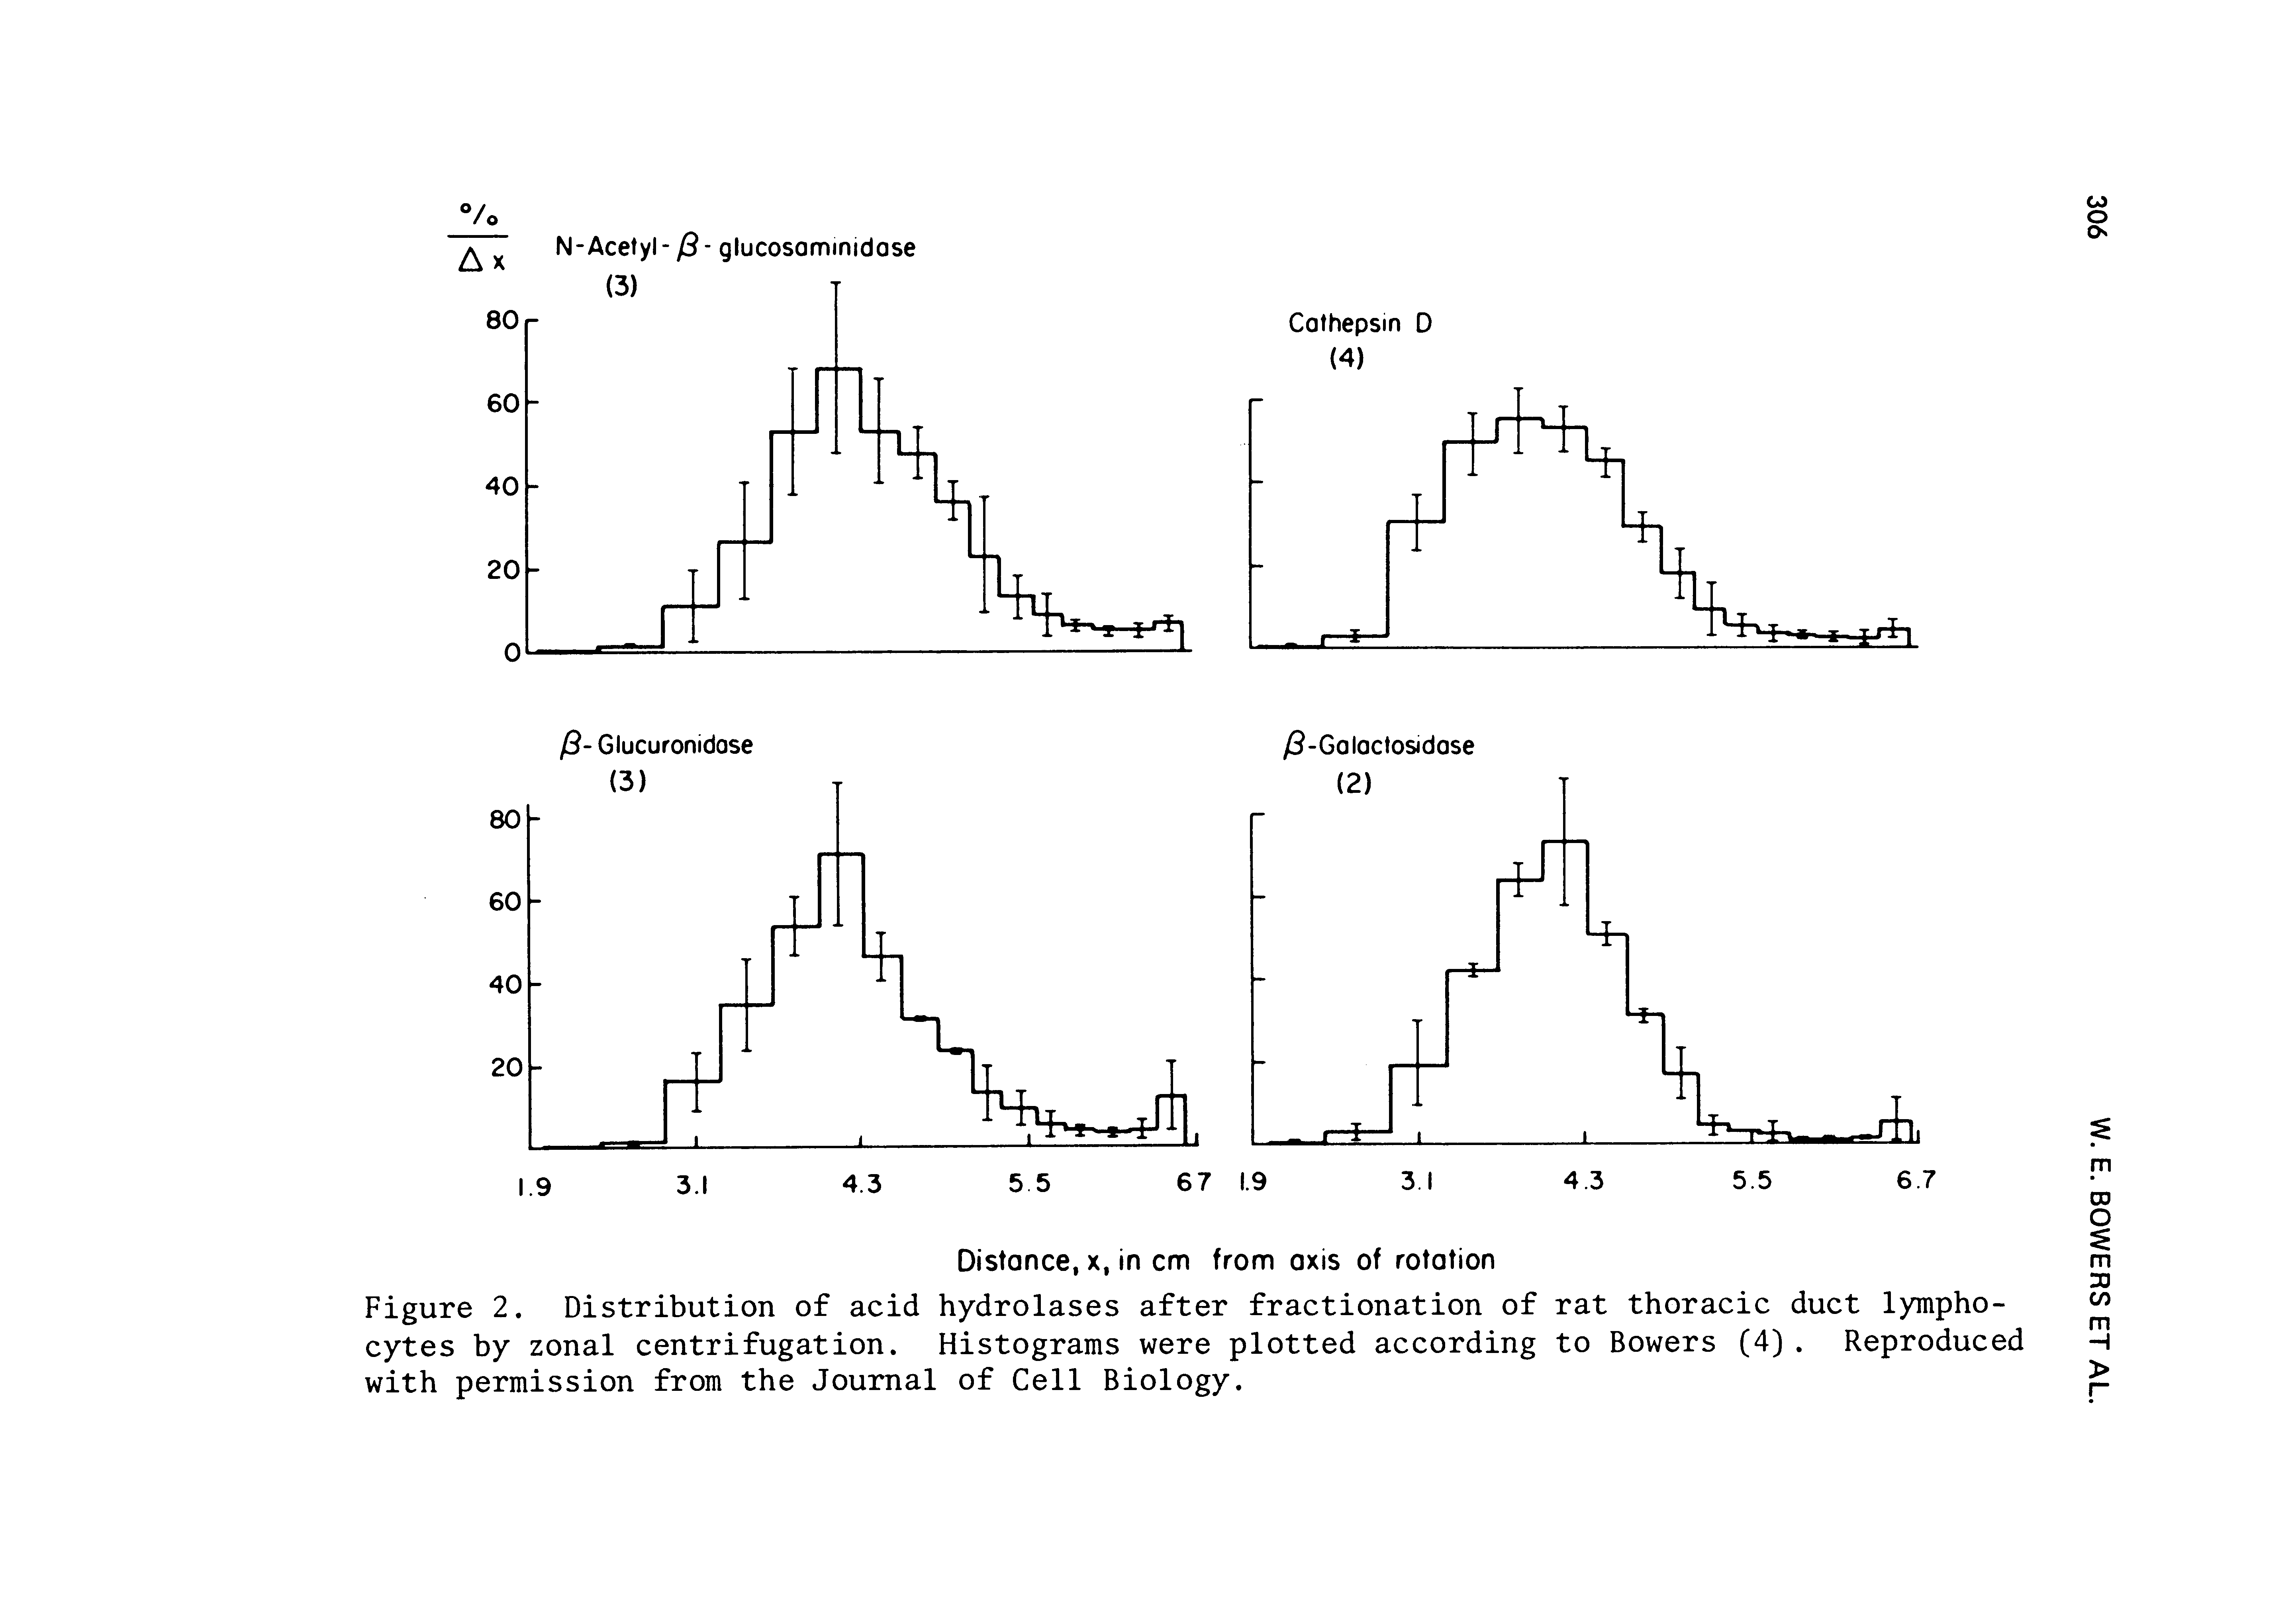 Figure 2. Distribution of acid hydrolases after fractionation of rat thoracic duct lymphocytes by zonal centrifugation. Histograms were plotted according to Bowers (4). Reproduced with permission from the Journal of Cell Biology.